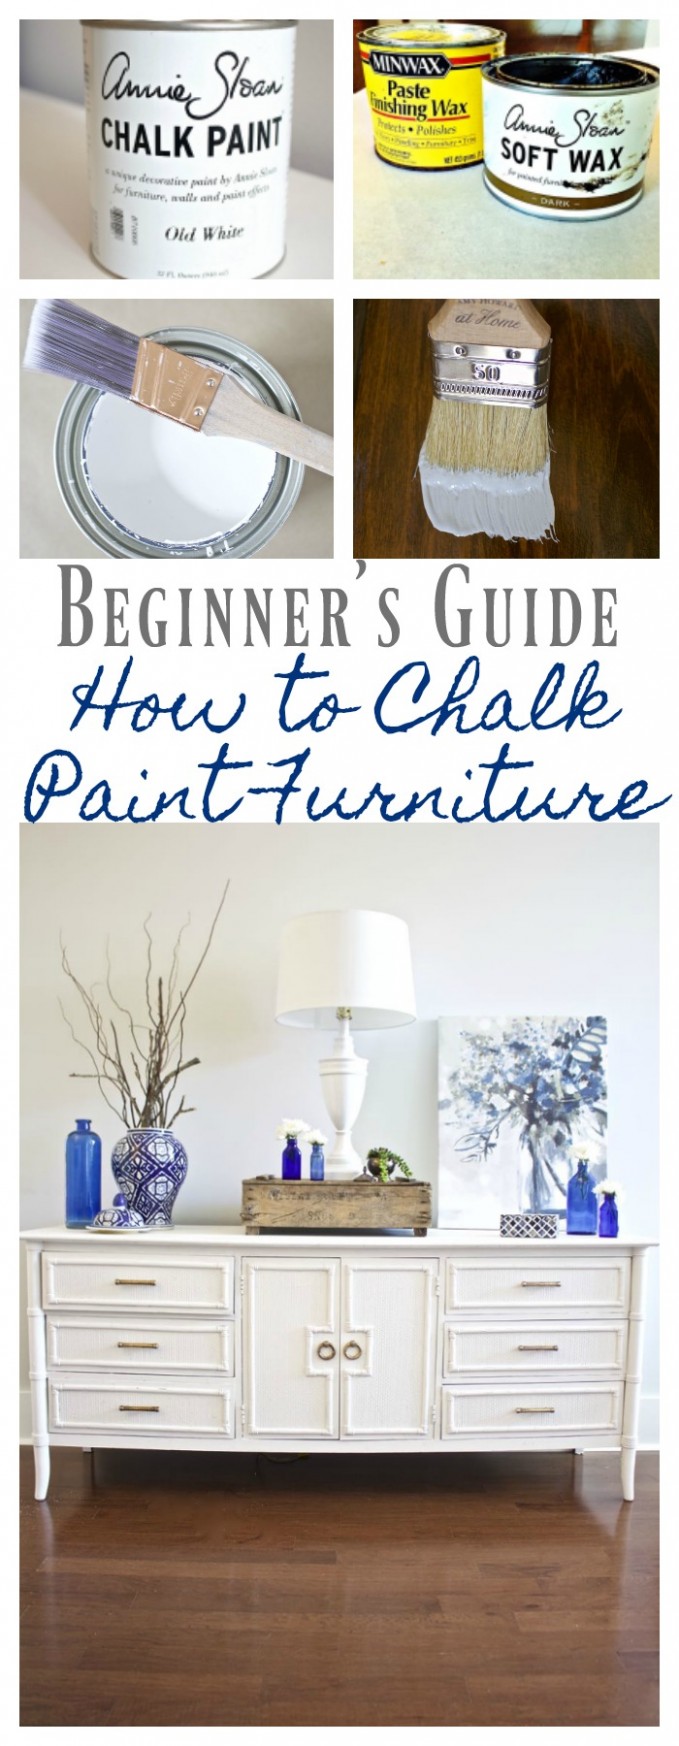 How To Chalk Paint Furniture Our Best Tips 8 Bees In A Pod Annie Sloan Clear Chalk Paint Wax